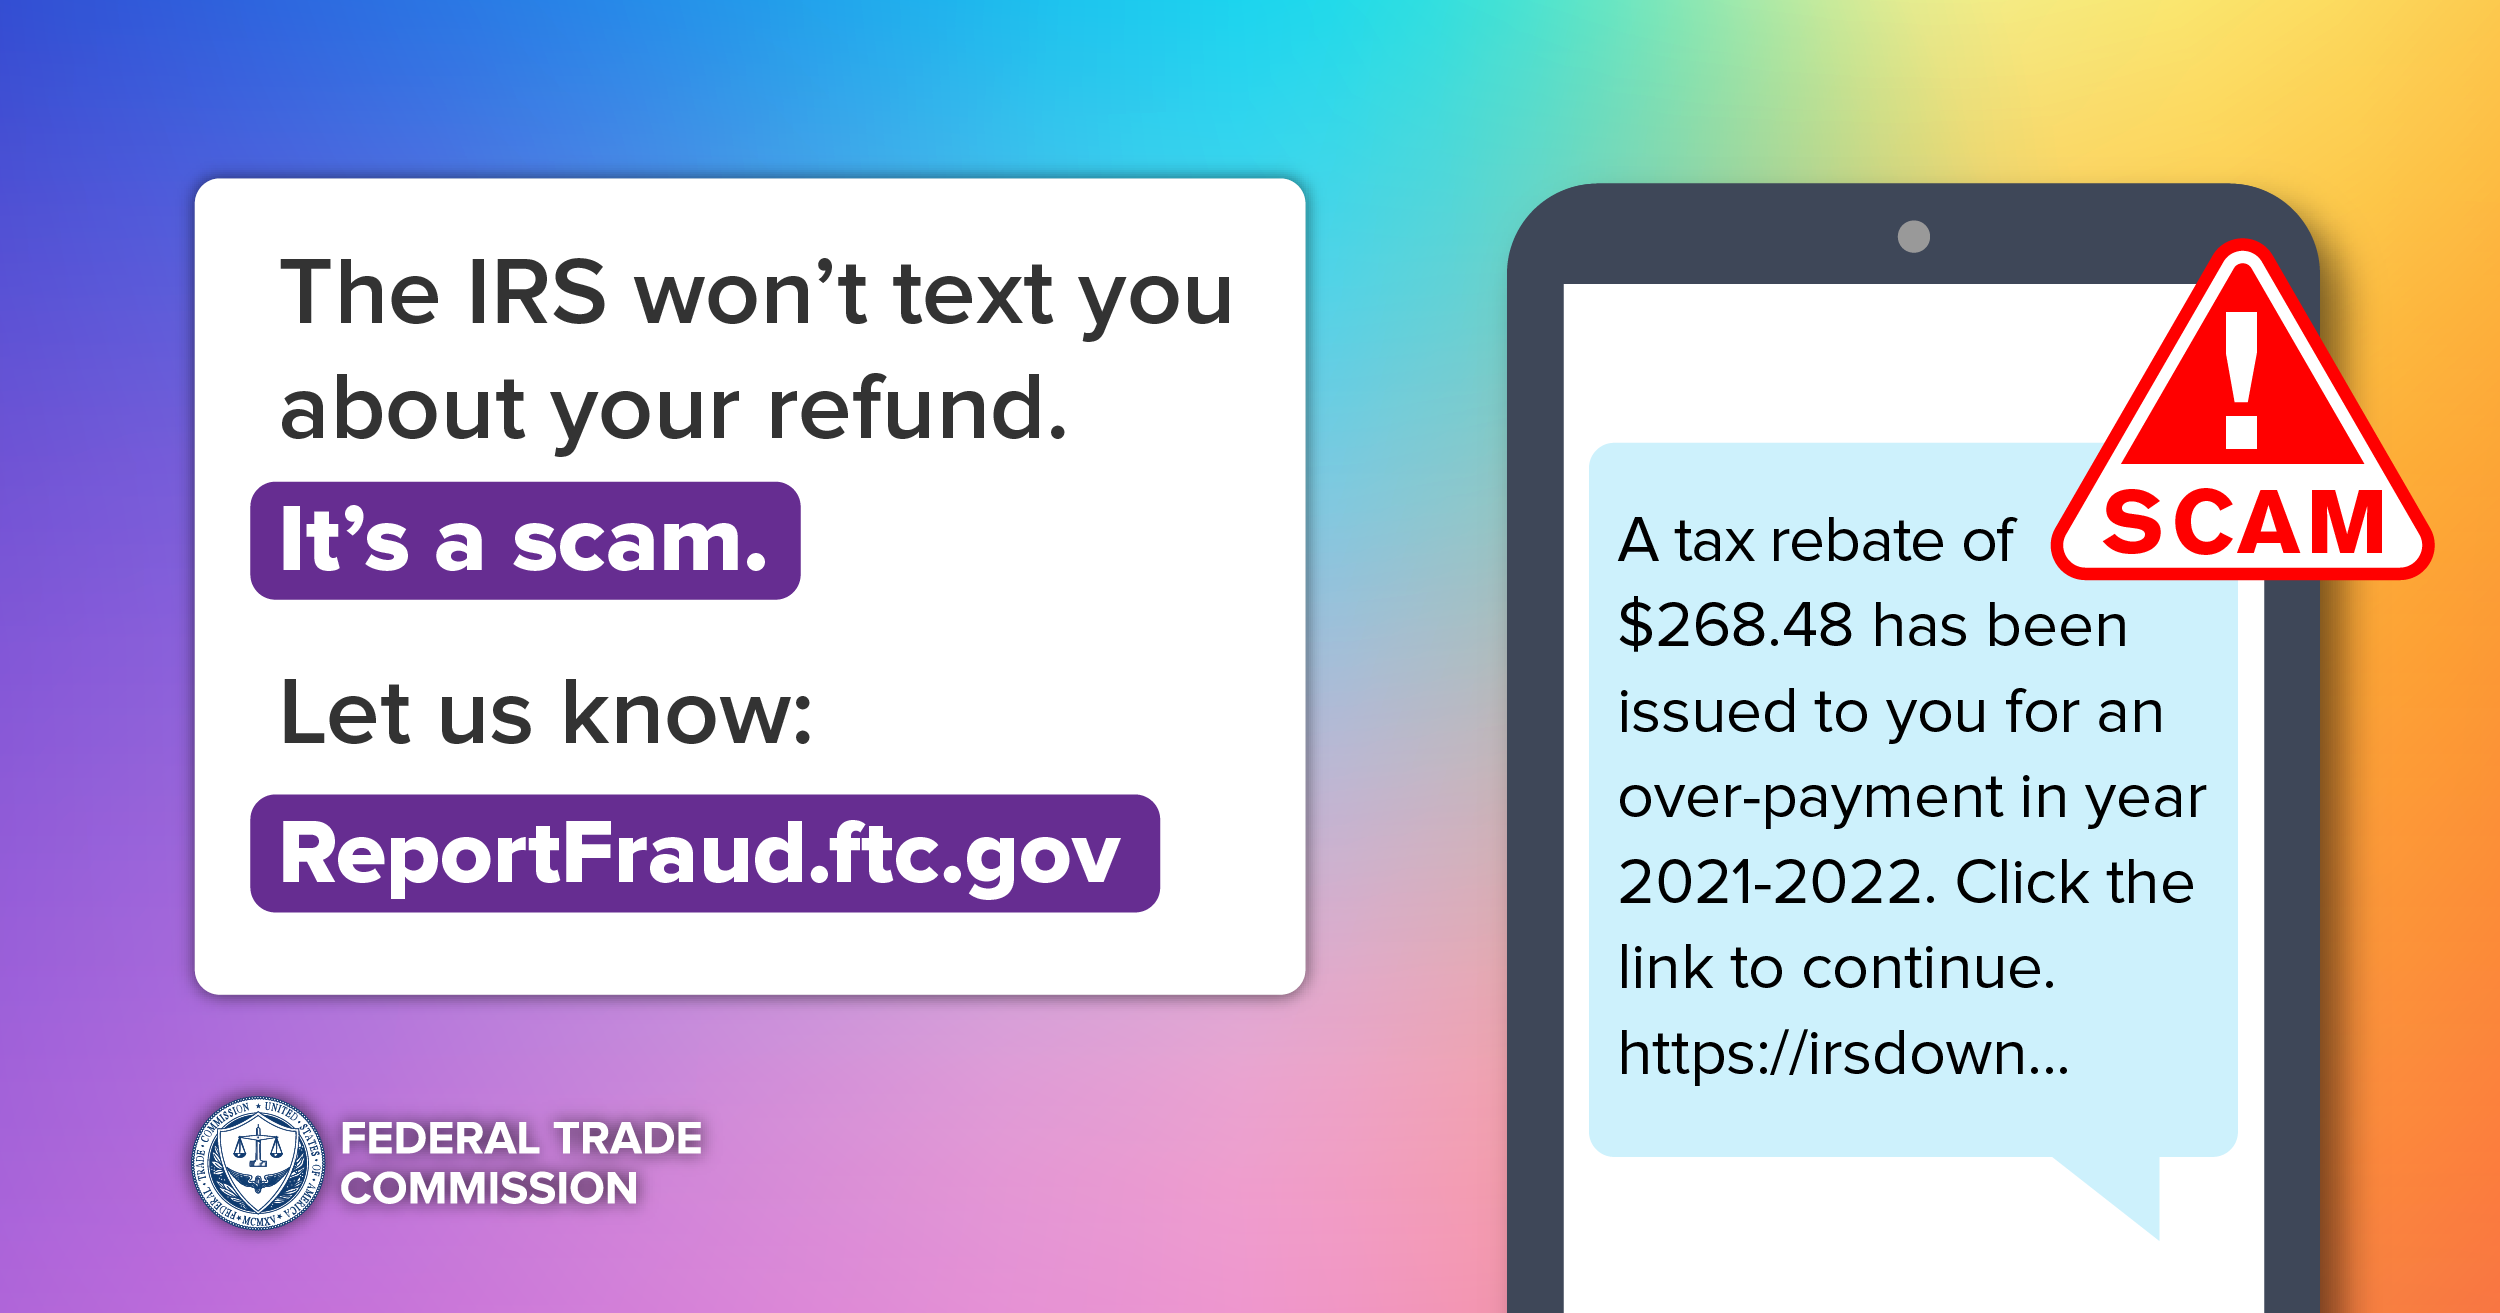 no-that-s-not-the-irs-texting-about-a-tax-refund-or-rebate-it-s-a